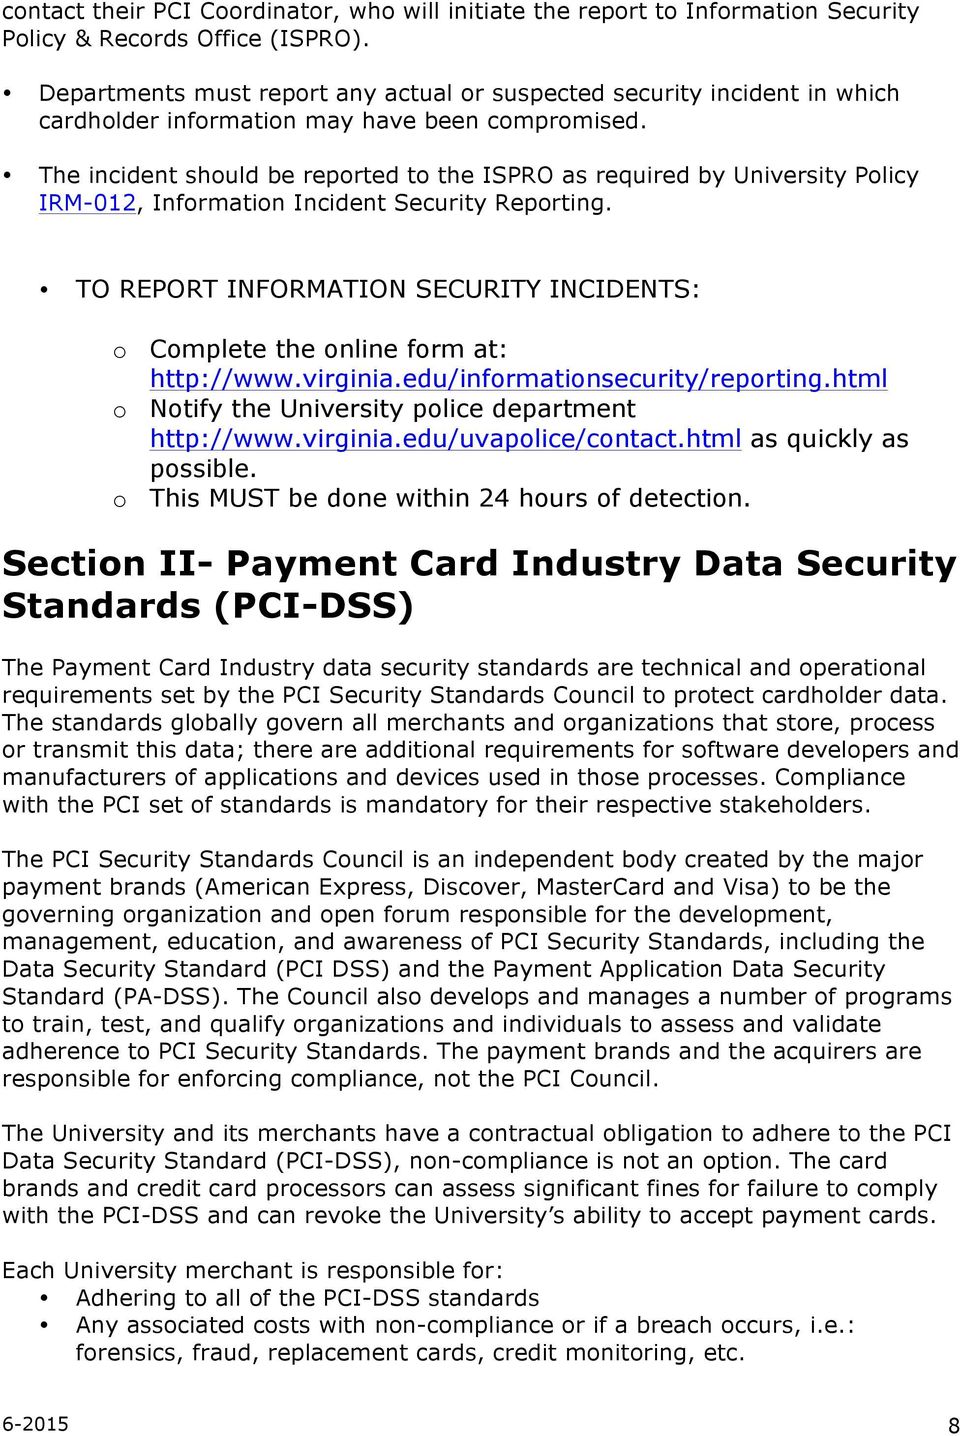 The incident should be reported to the ISPRO as required by University Policy IRM-012, Information Incident Security Reporting.